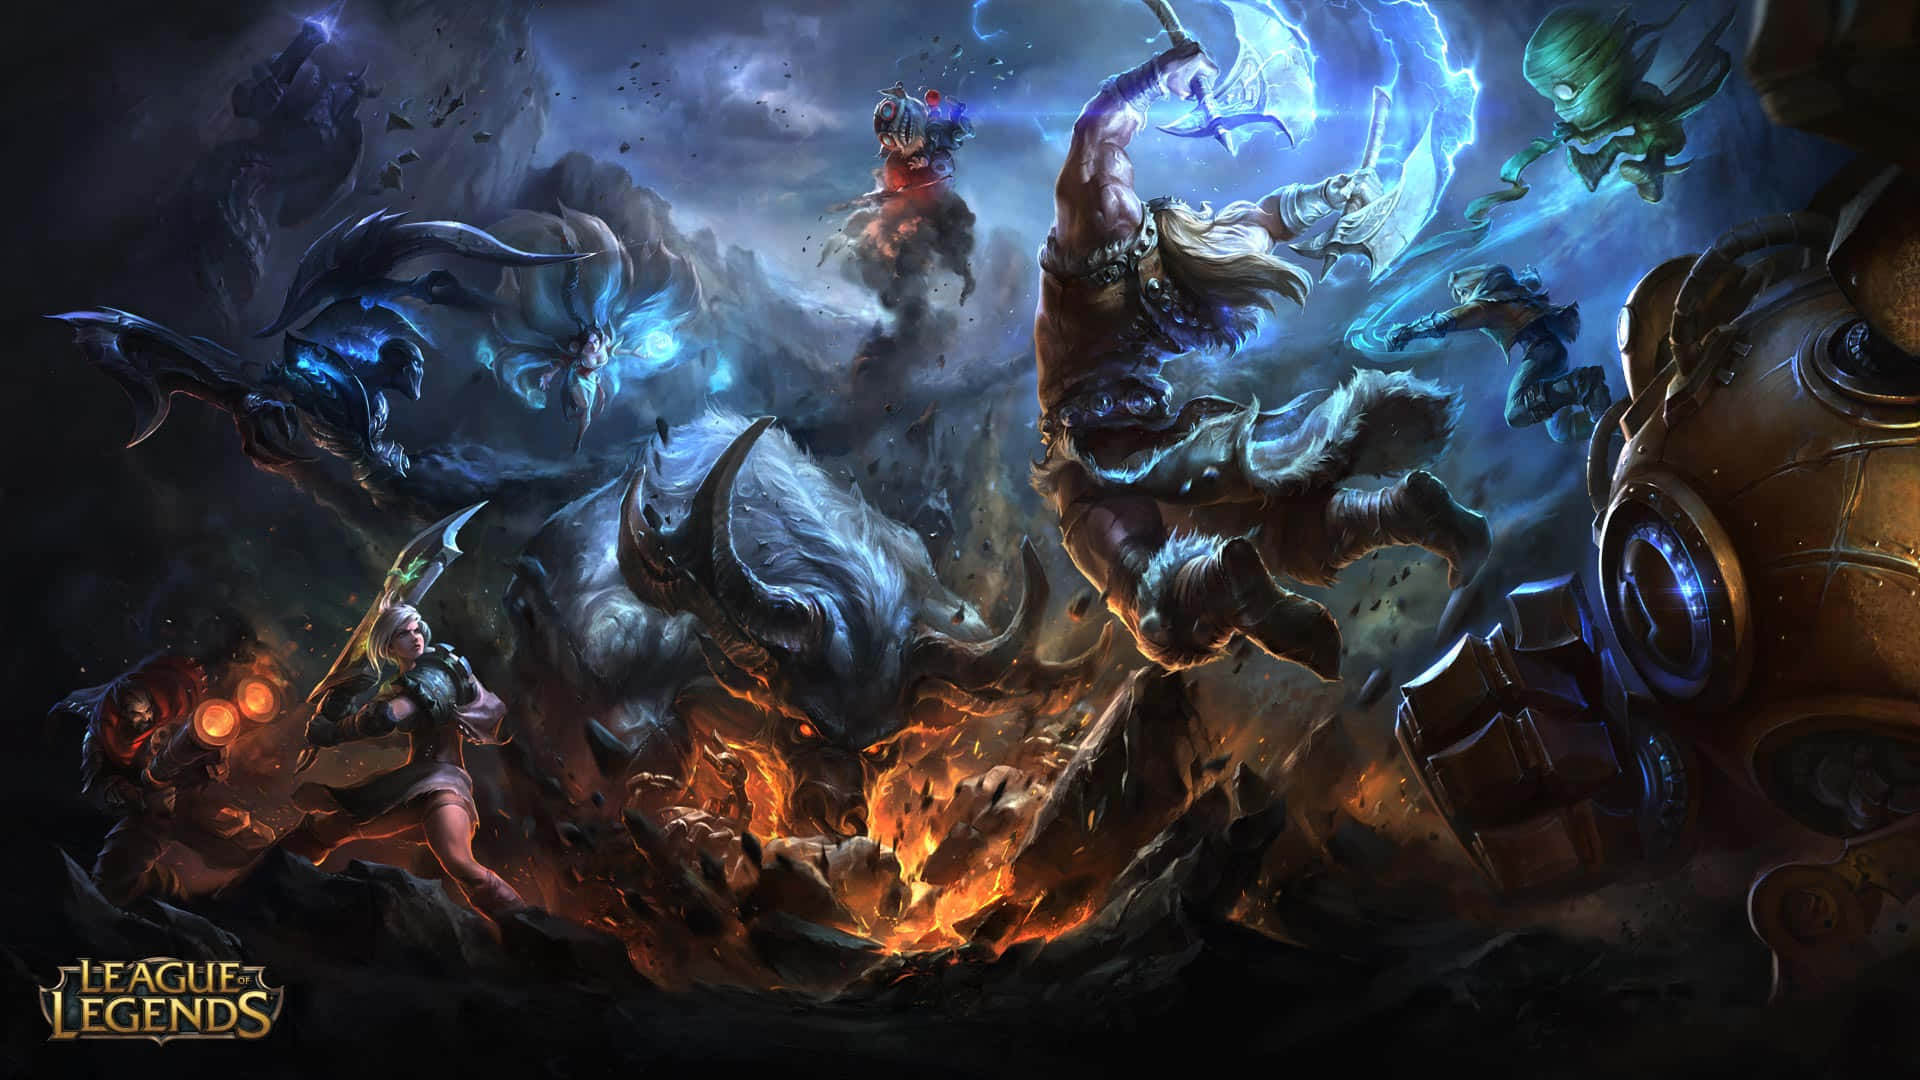 Upgrade your gaming experience with a League-of-Legends-themed laptop Wallpaper